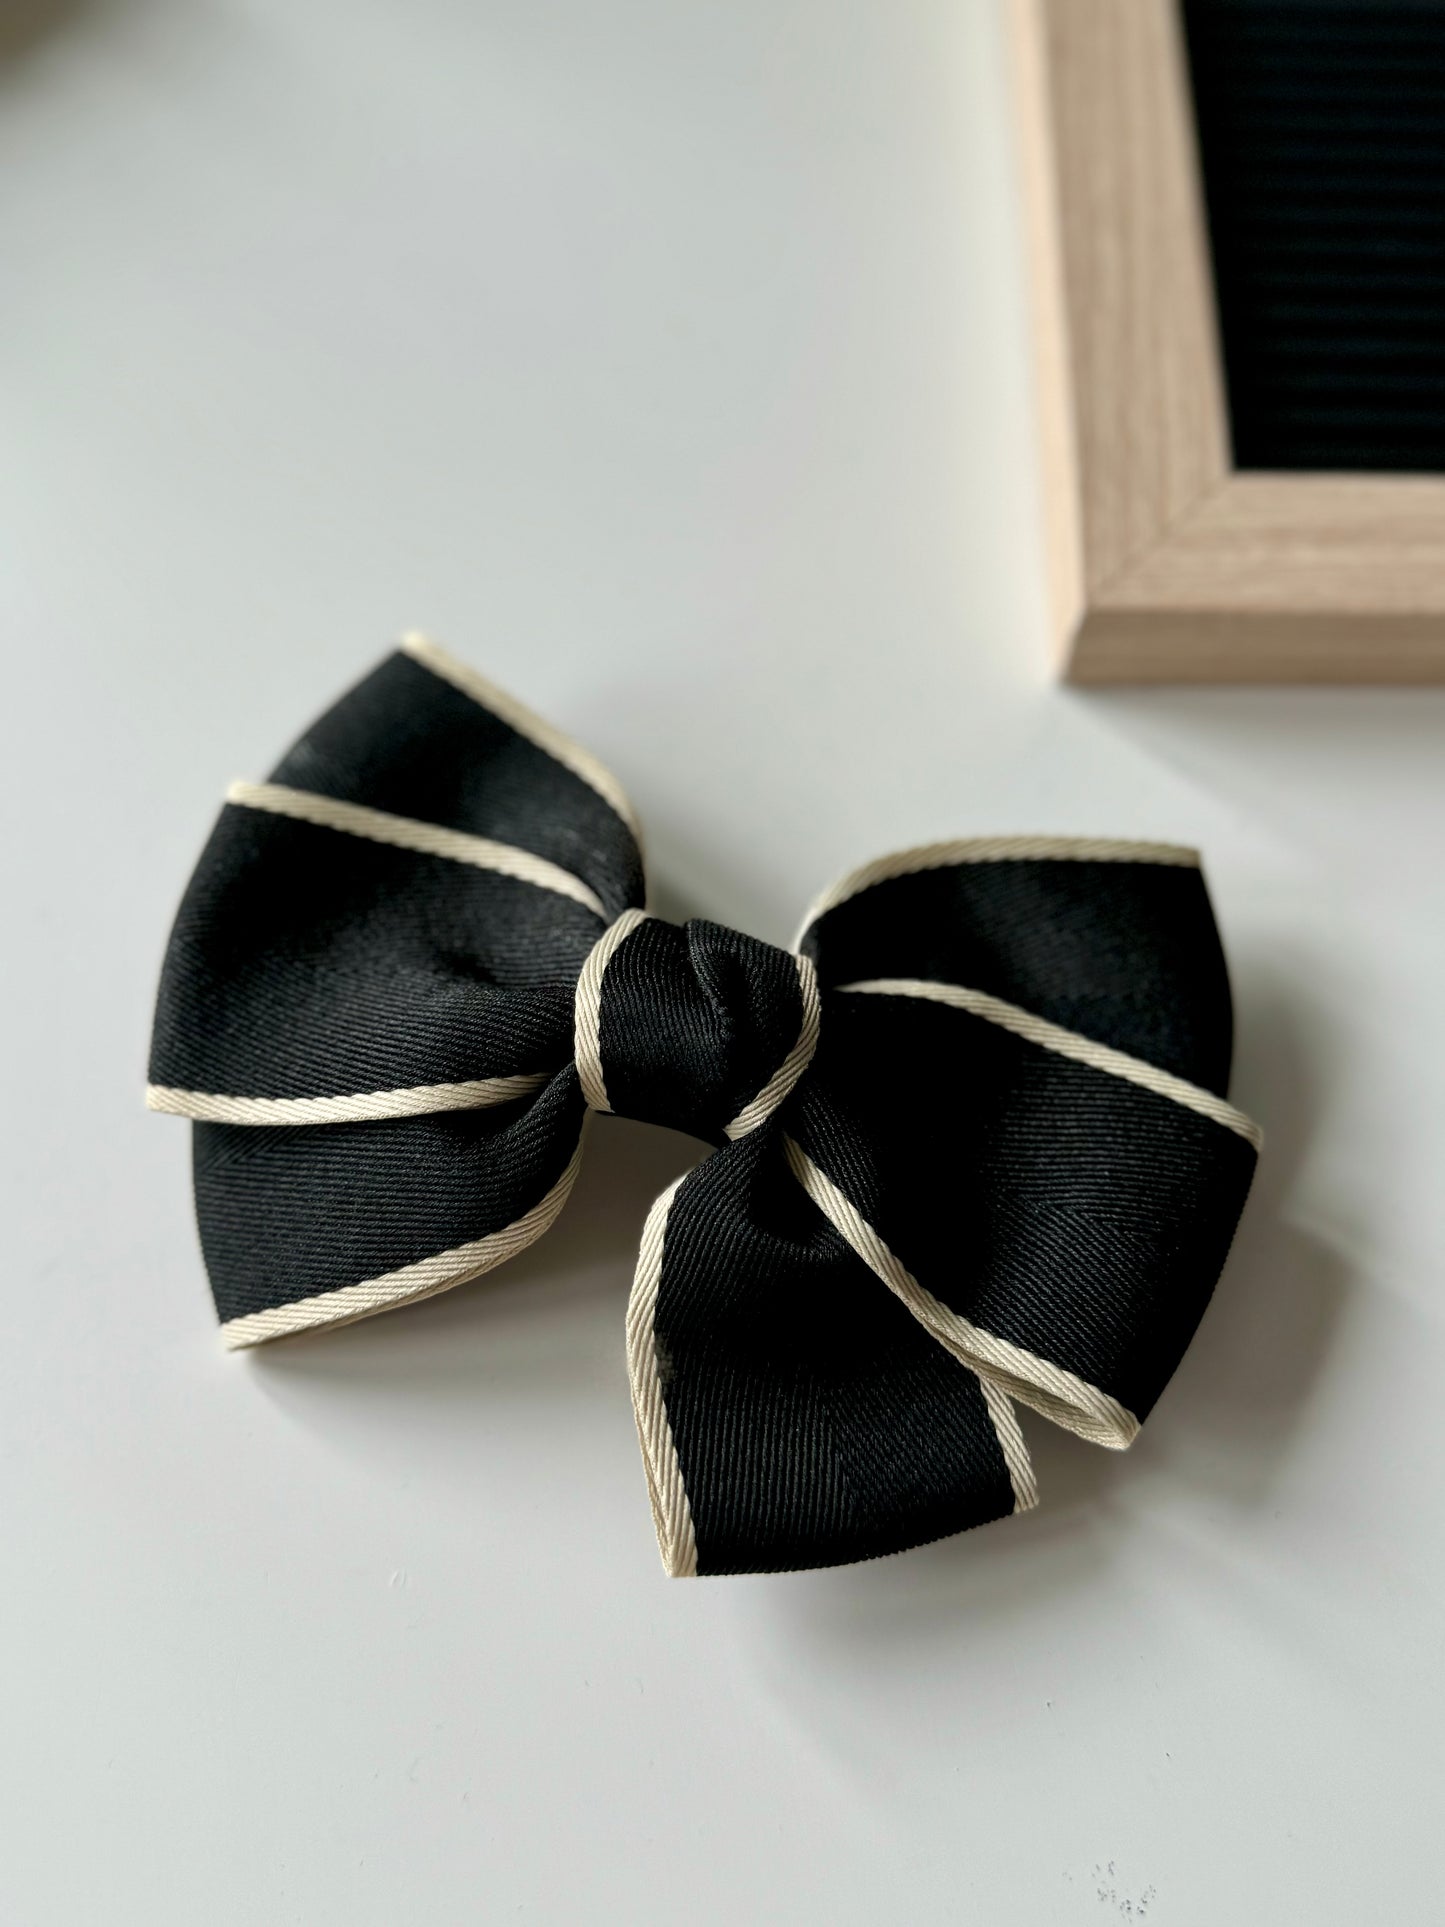 Chic Noir: Bowknot French Barrette Sweet Hair Clip in Black